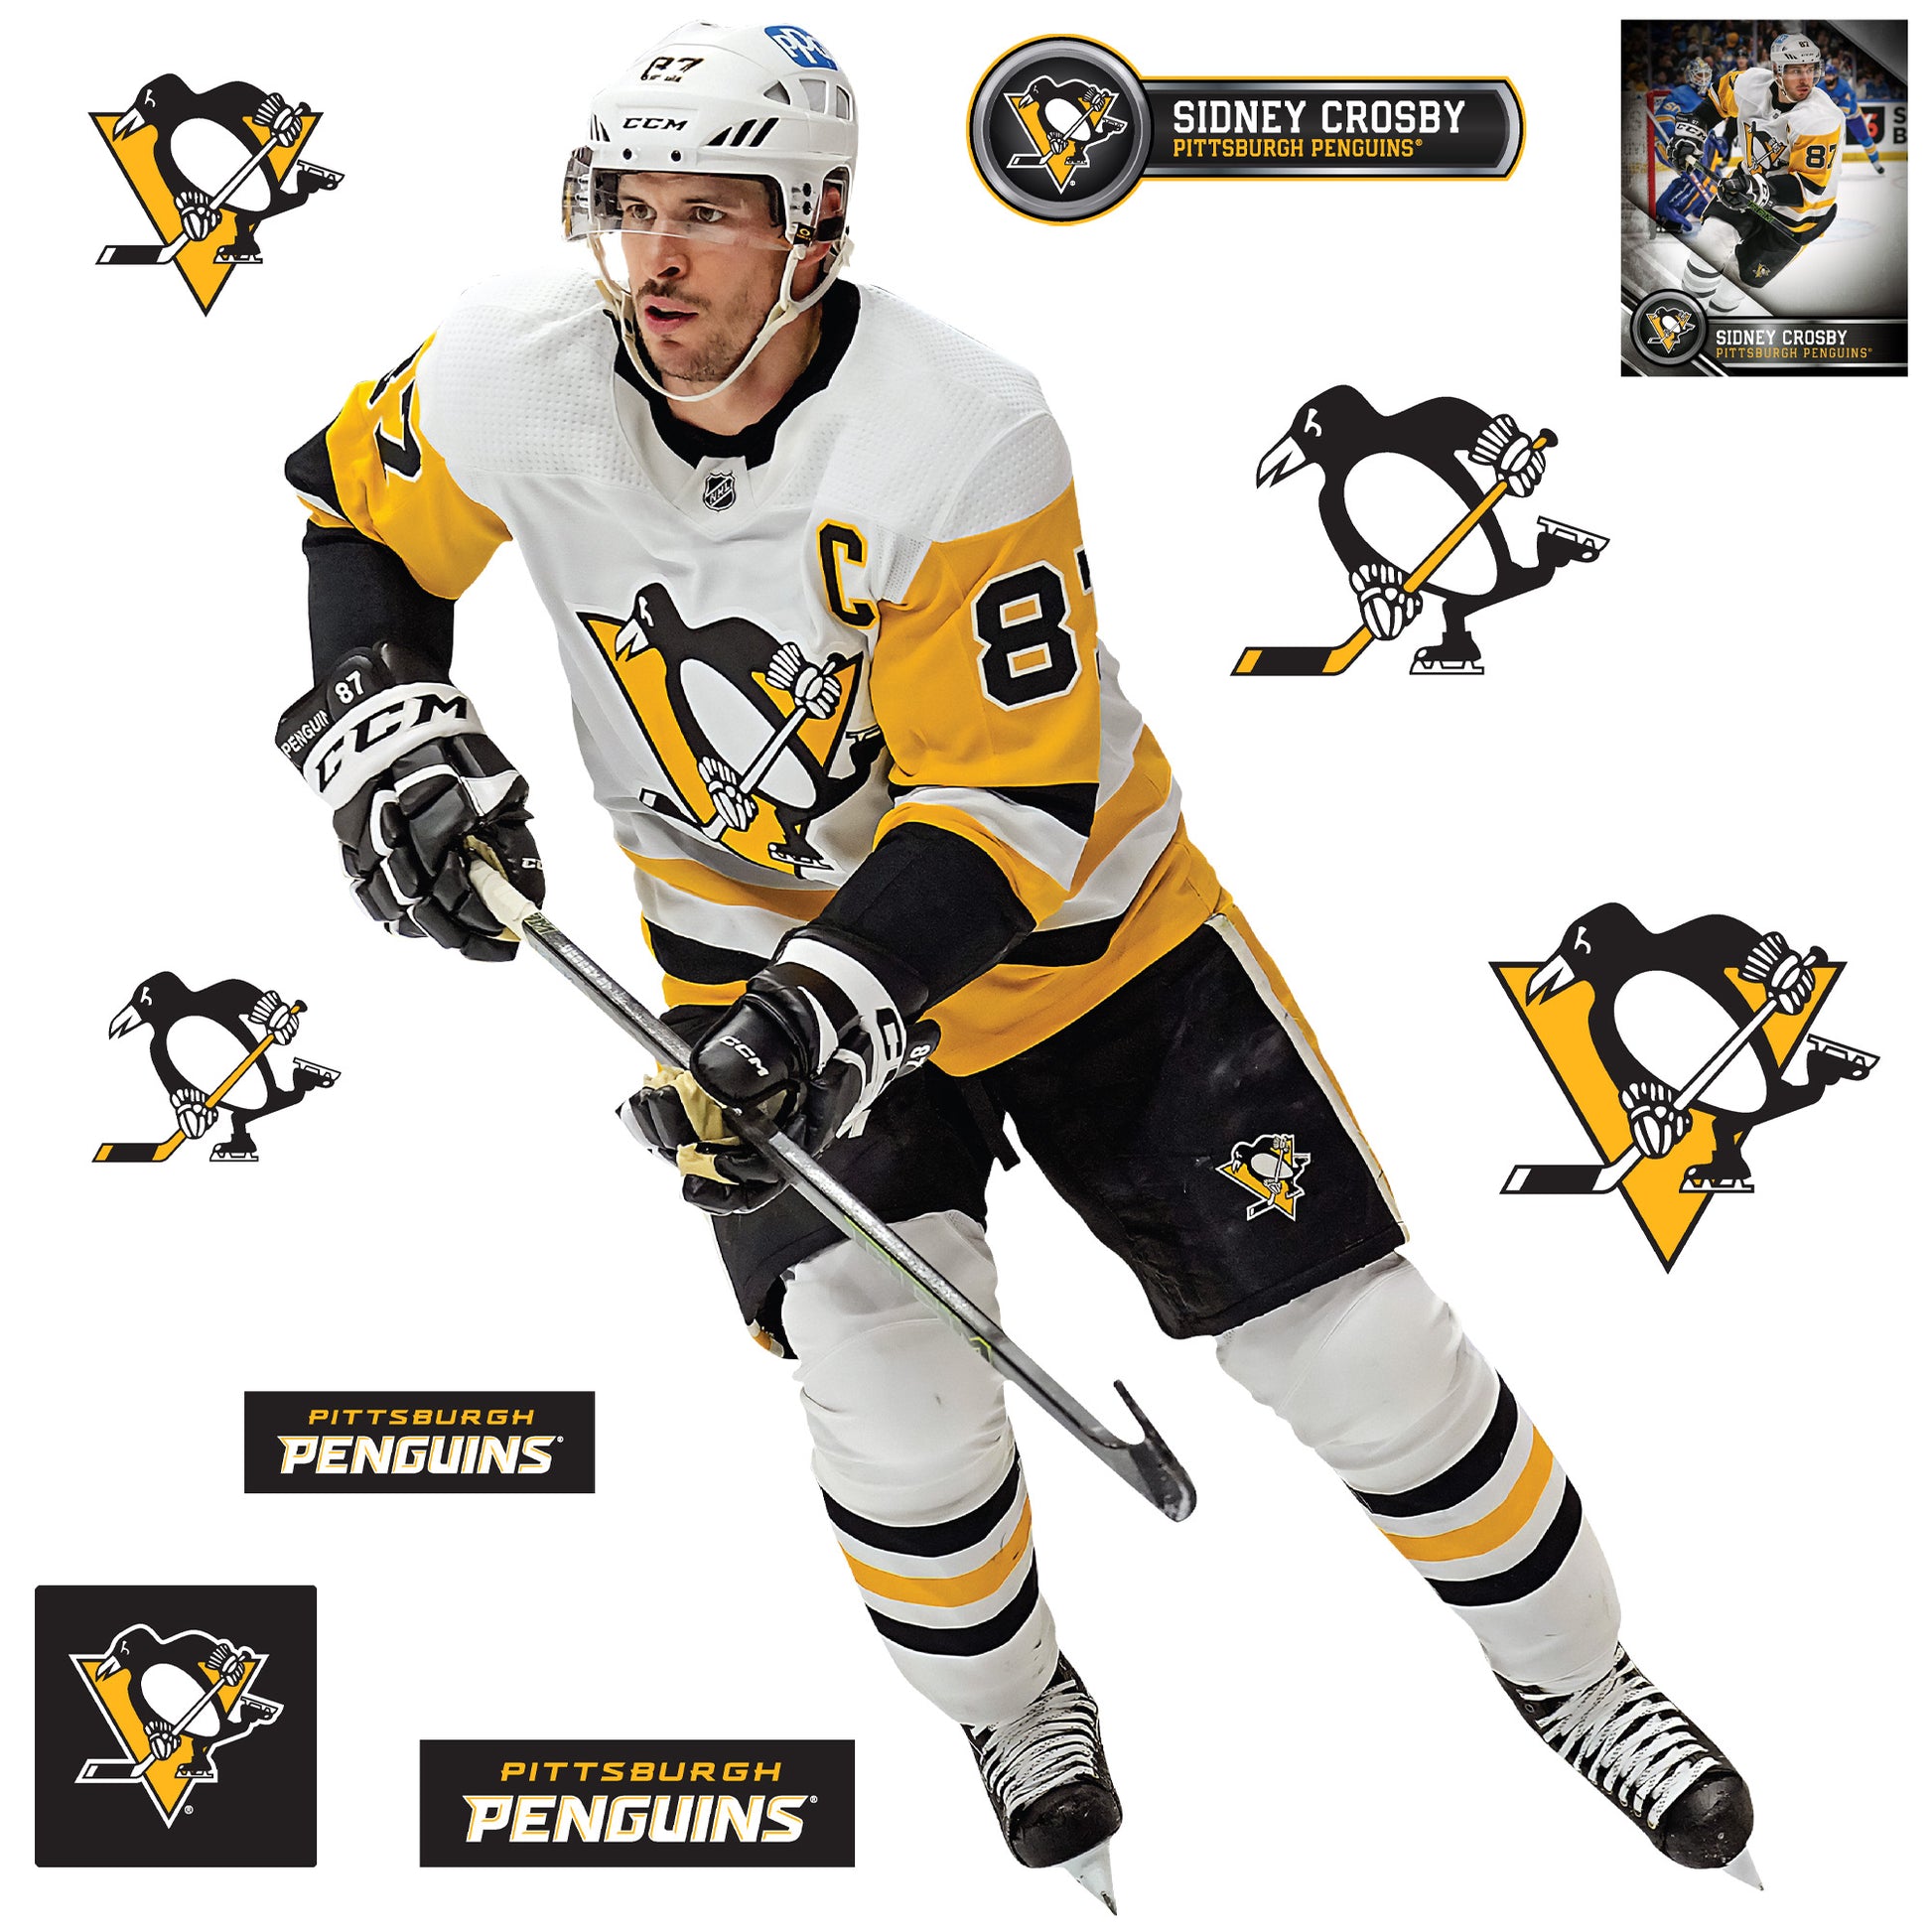 Pittsburgh Penguins: Sidney Crosby 2021 Growth Chart - Officially